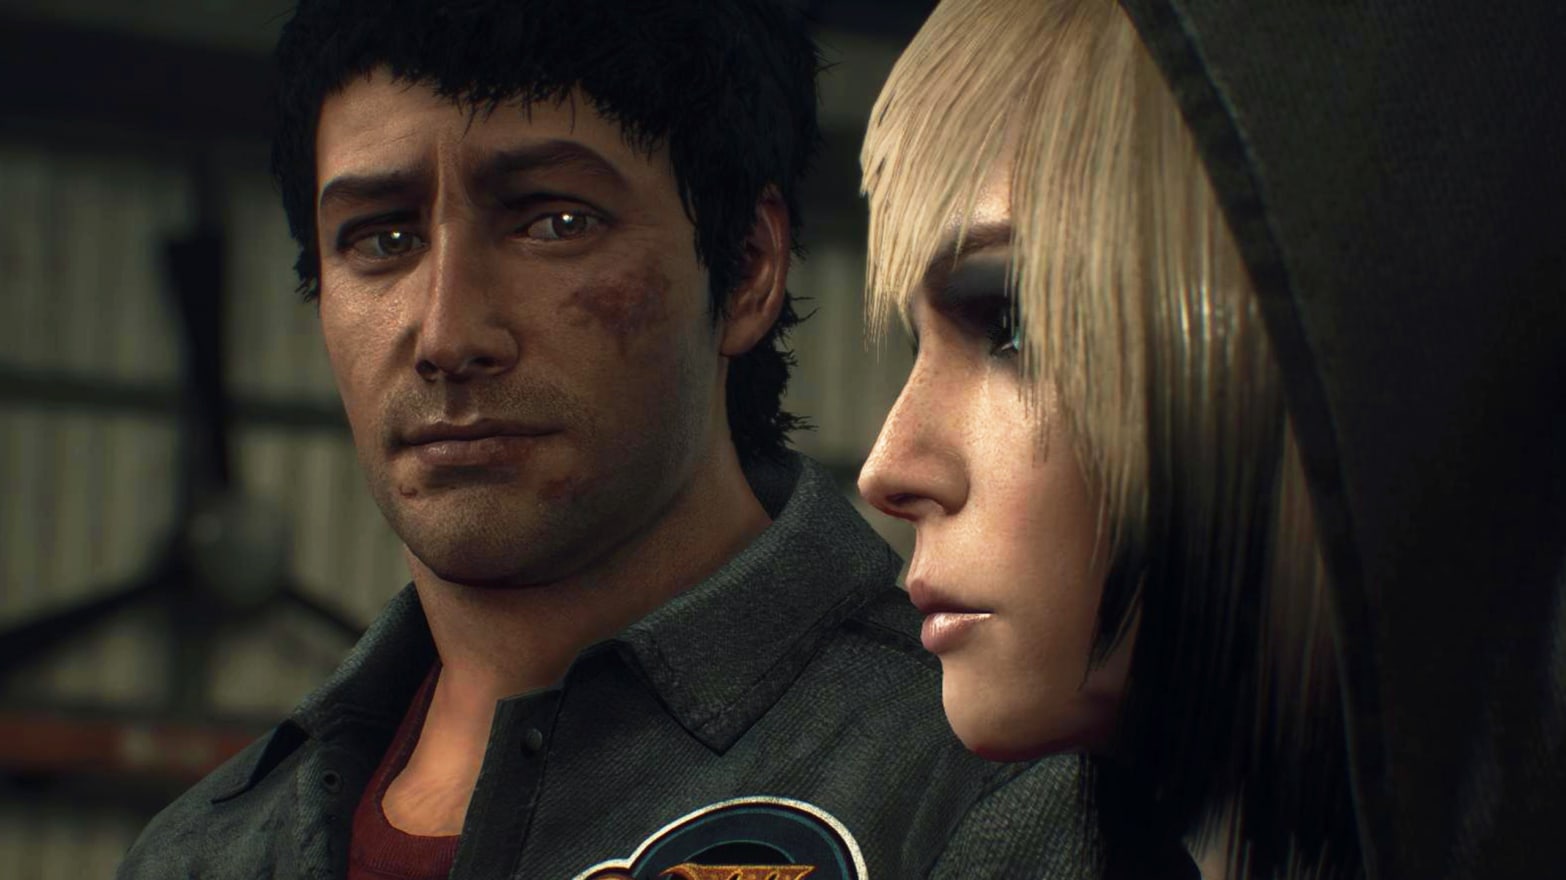 Dead Rising 3 is the Xbox One's gigantic, though bizarre and